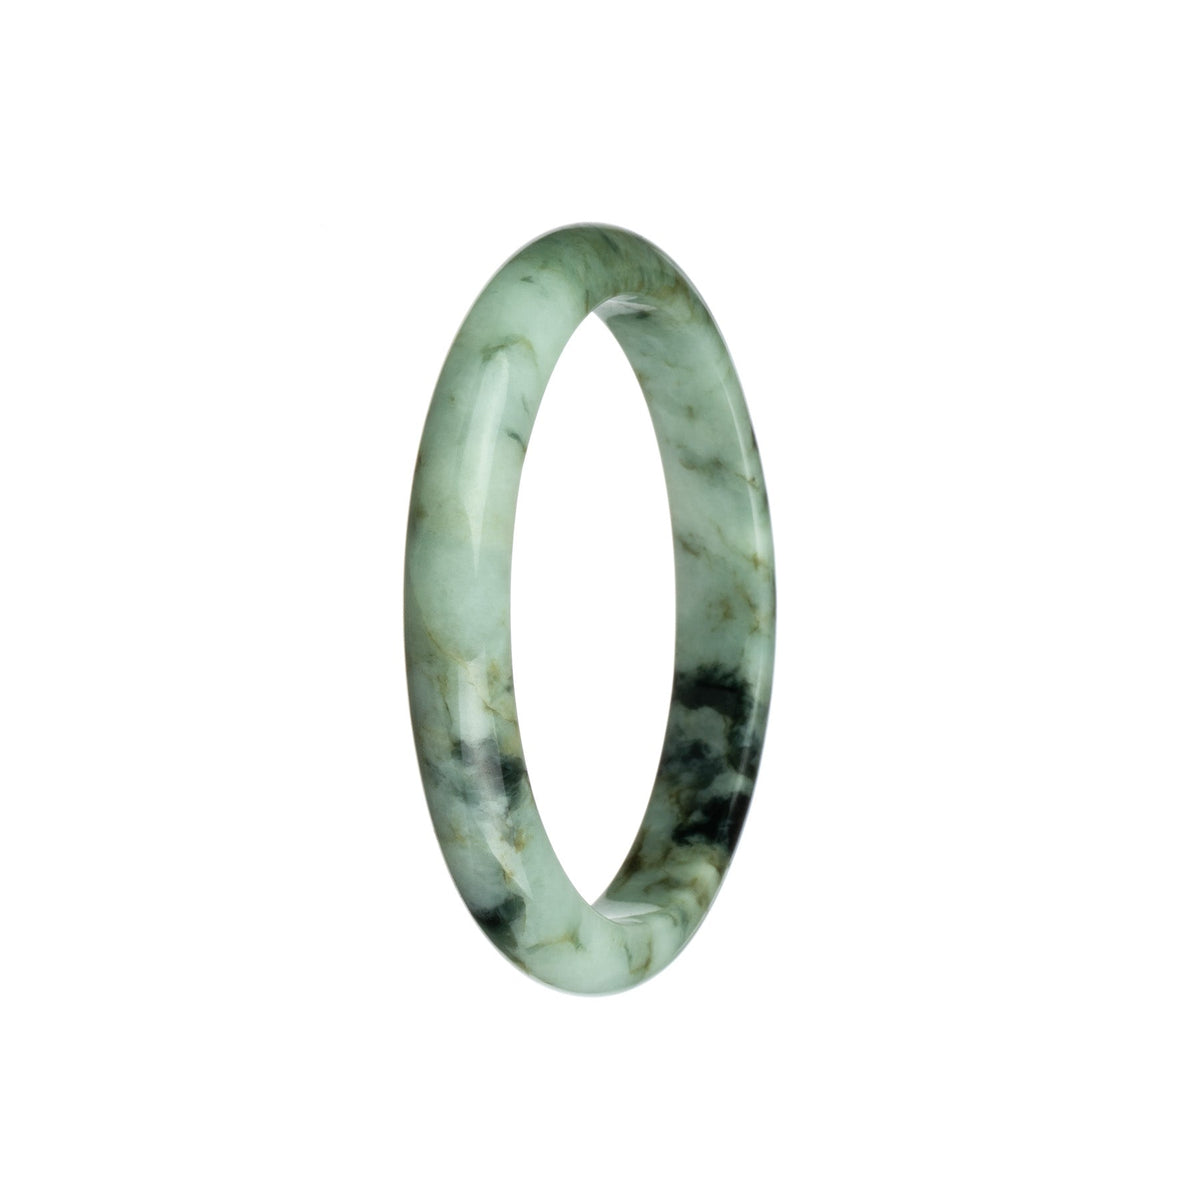 A semi-round Burmese jade bangle featuring a genuine natural white color with a striking green and black pattern. Diameter measures 58mm.